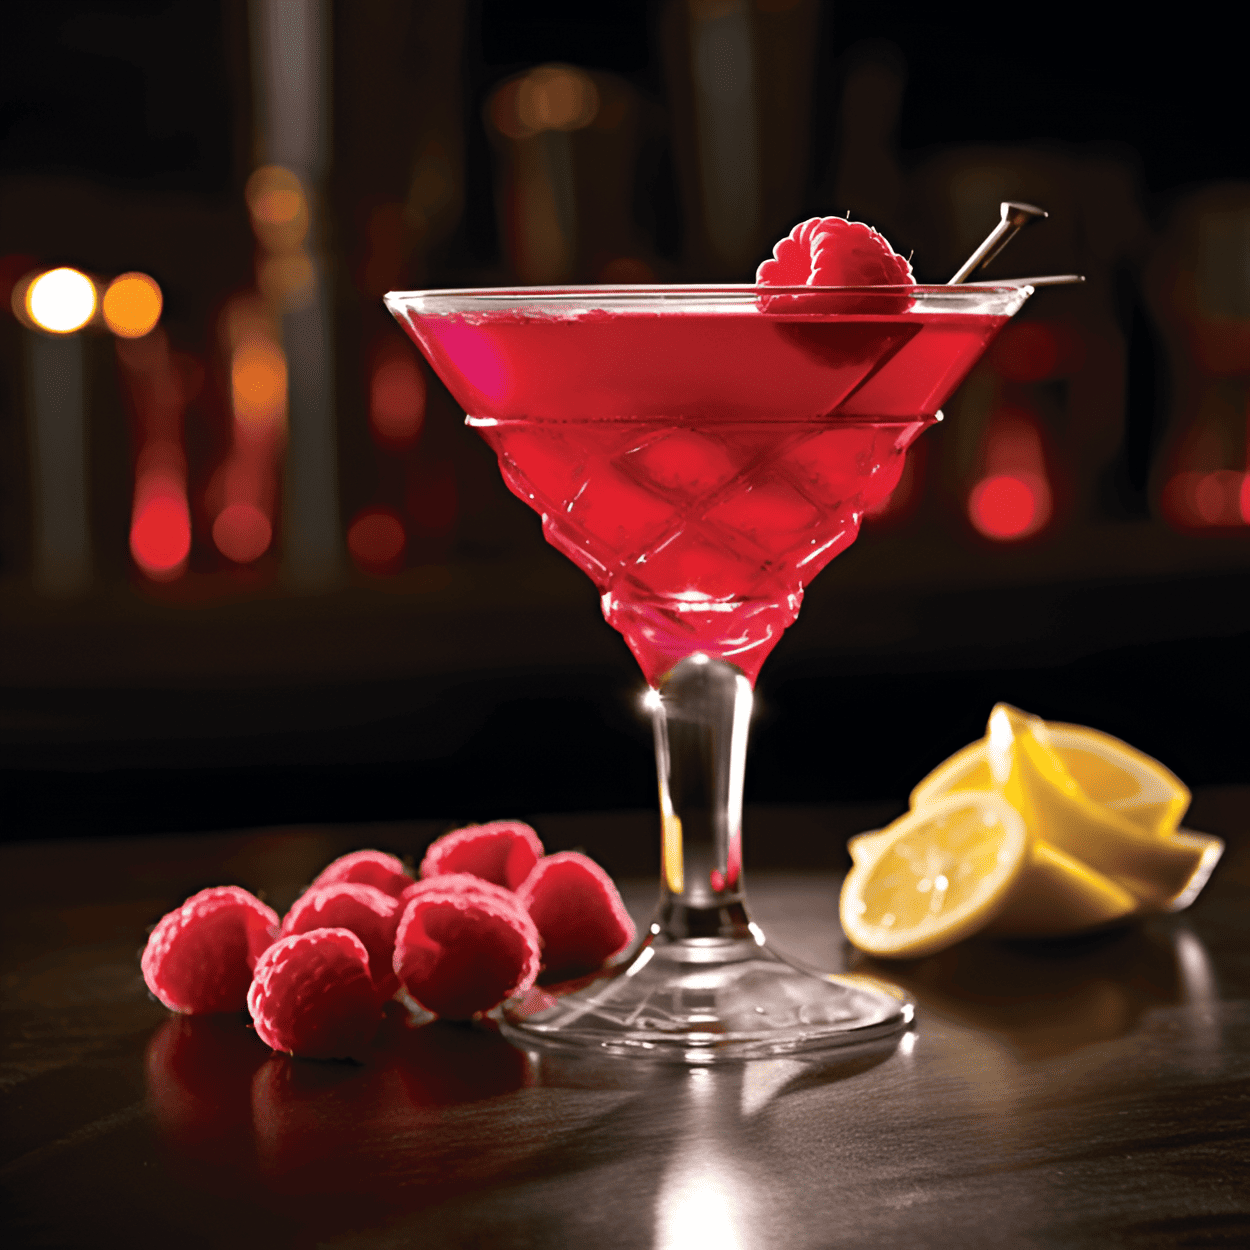 Razzmatazz Cocktail Recipe - The Razzmatazz cocktail is a delightful blend of sweet, tart, and fruity flavors. The raspberry liqueur lends a sweet, berry-forward taste that's balanced by the tartness of the lemon juice. The vodka adds a clean, crisp edge that cuts through the sweetness, making for a well-rounded, refreshing drink.